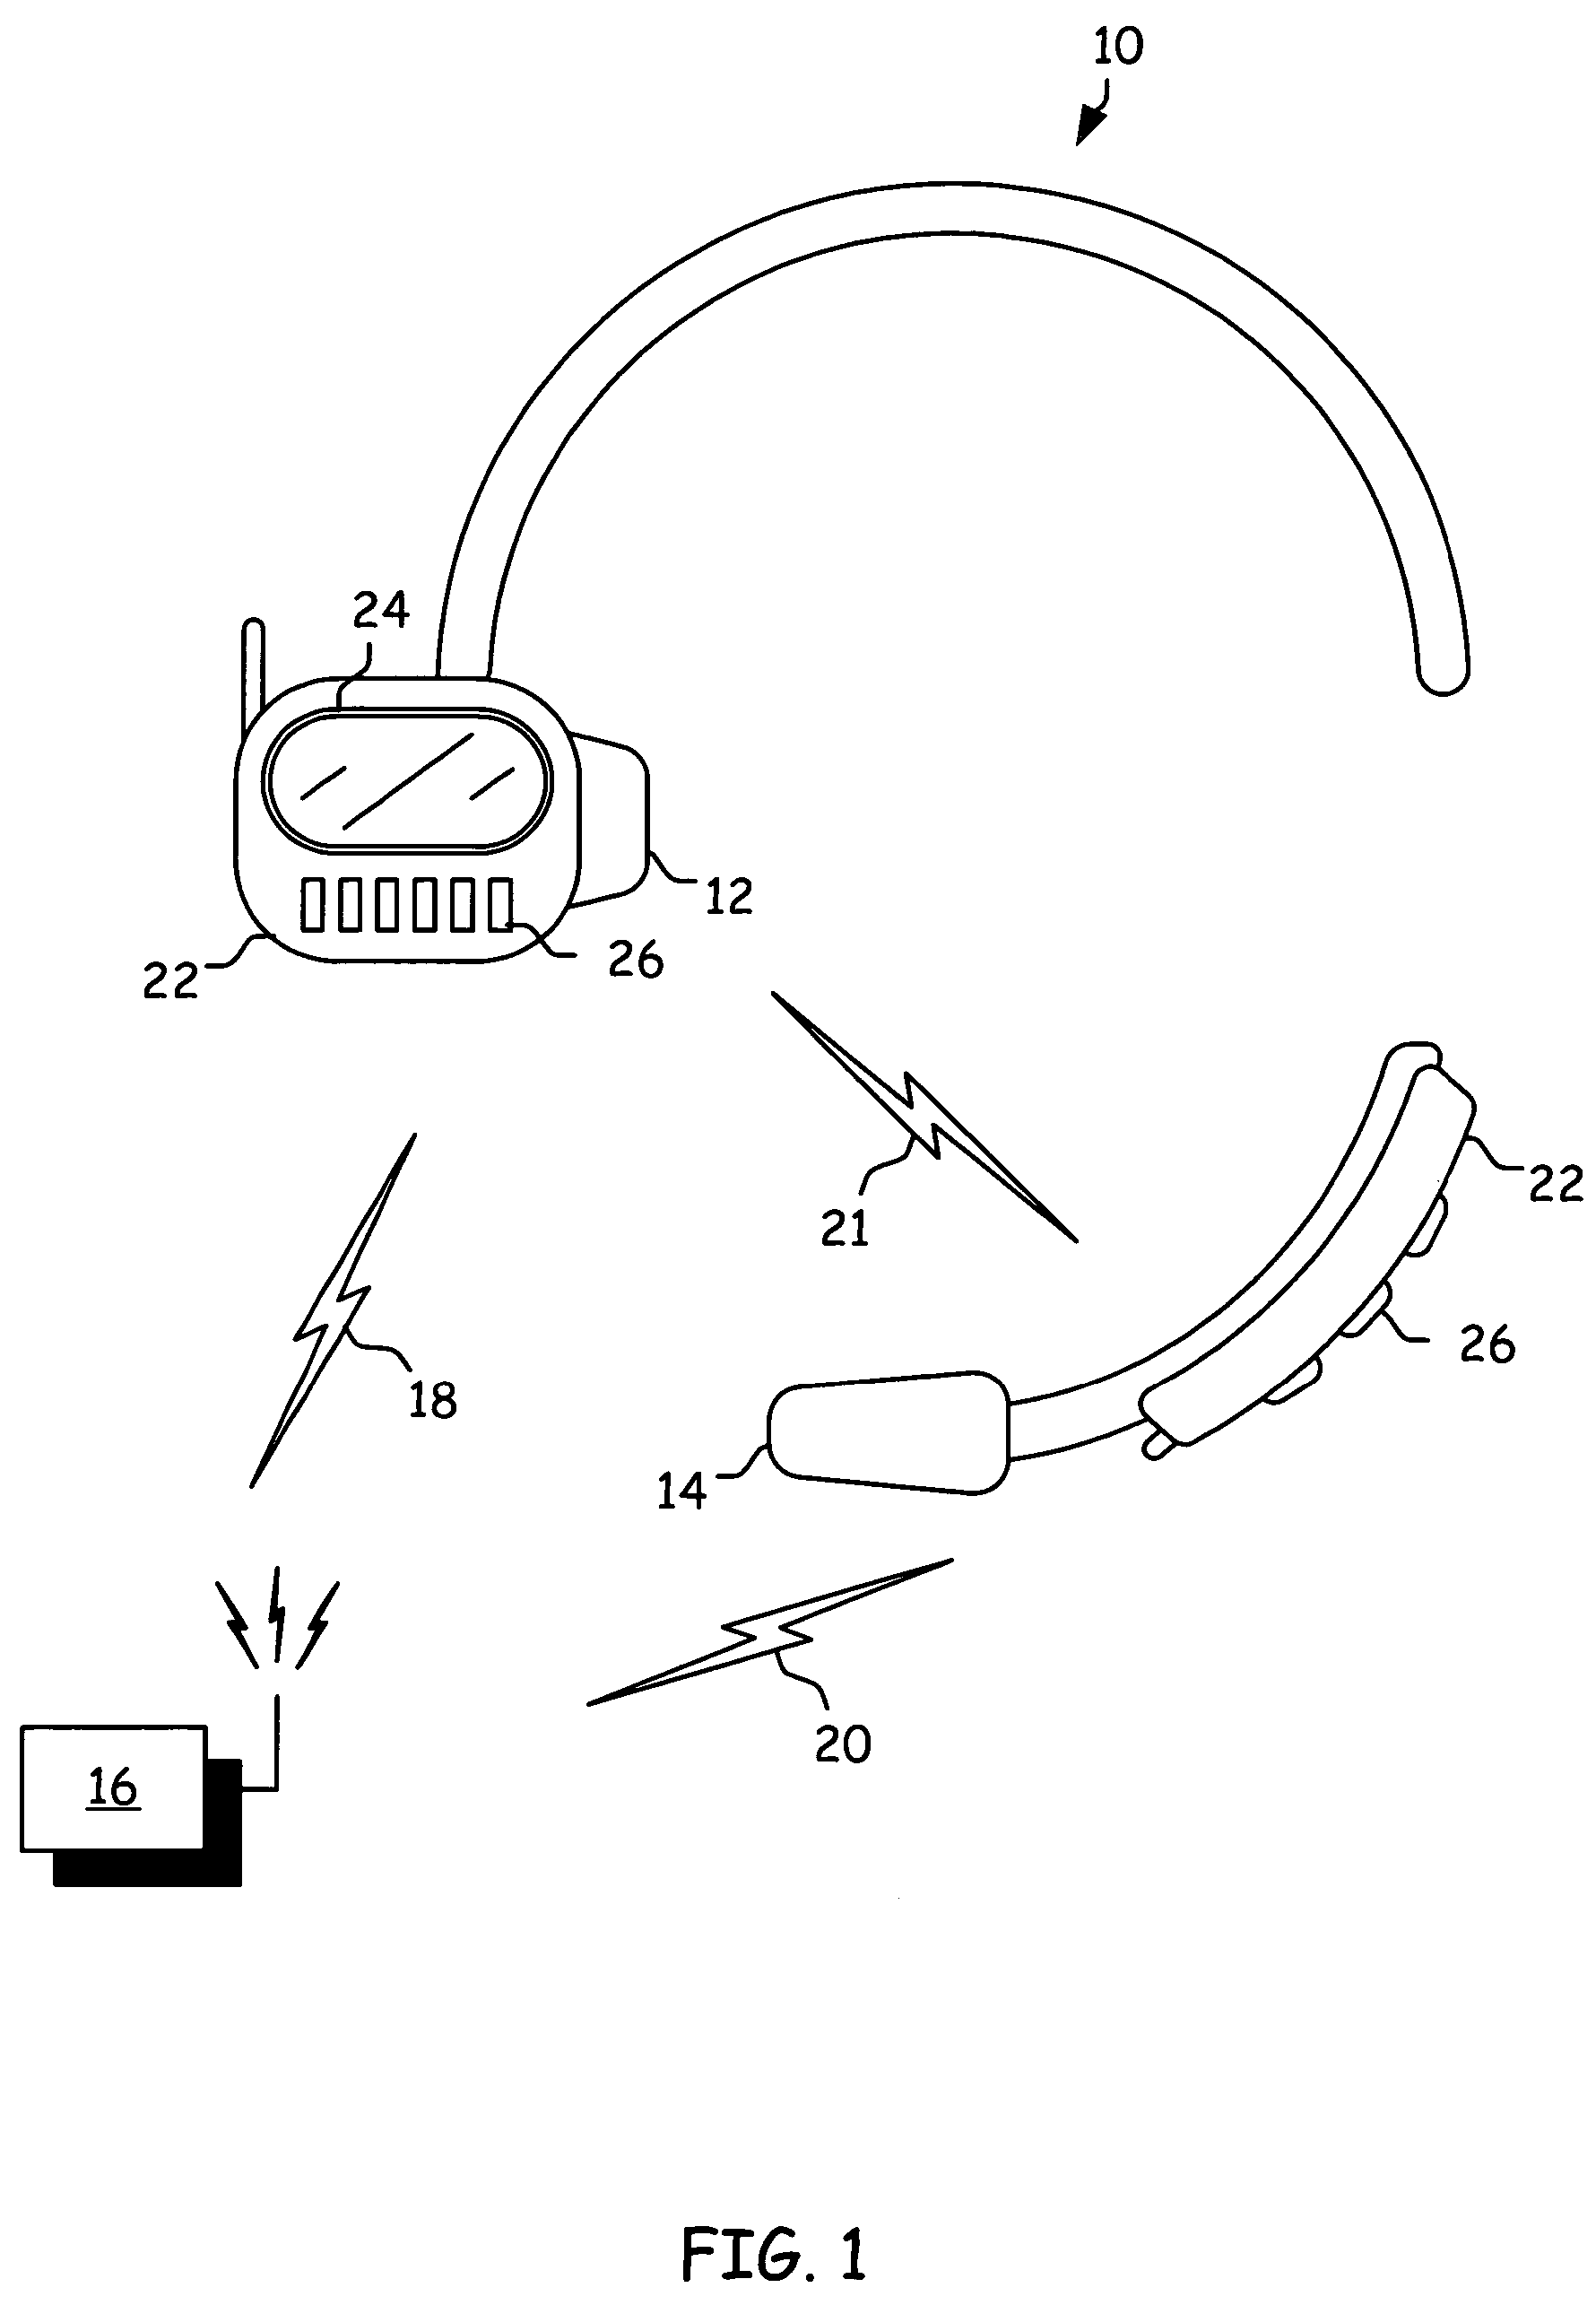 Pairing modular wireless earpiece/microphone (HEADSET) to a serviced base portion and subsequent access thereto